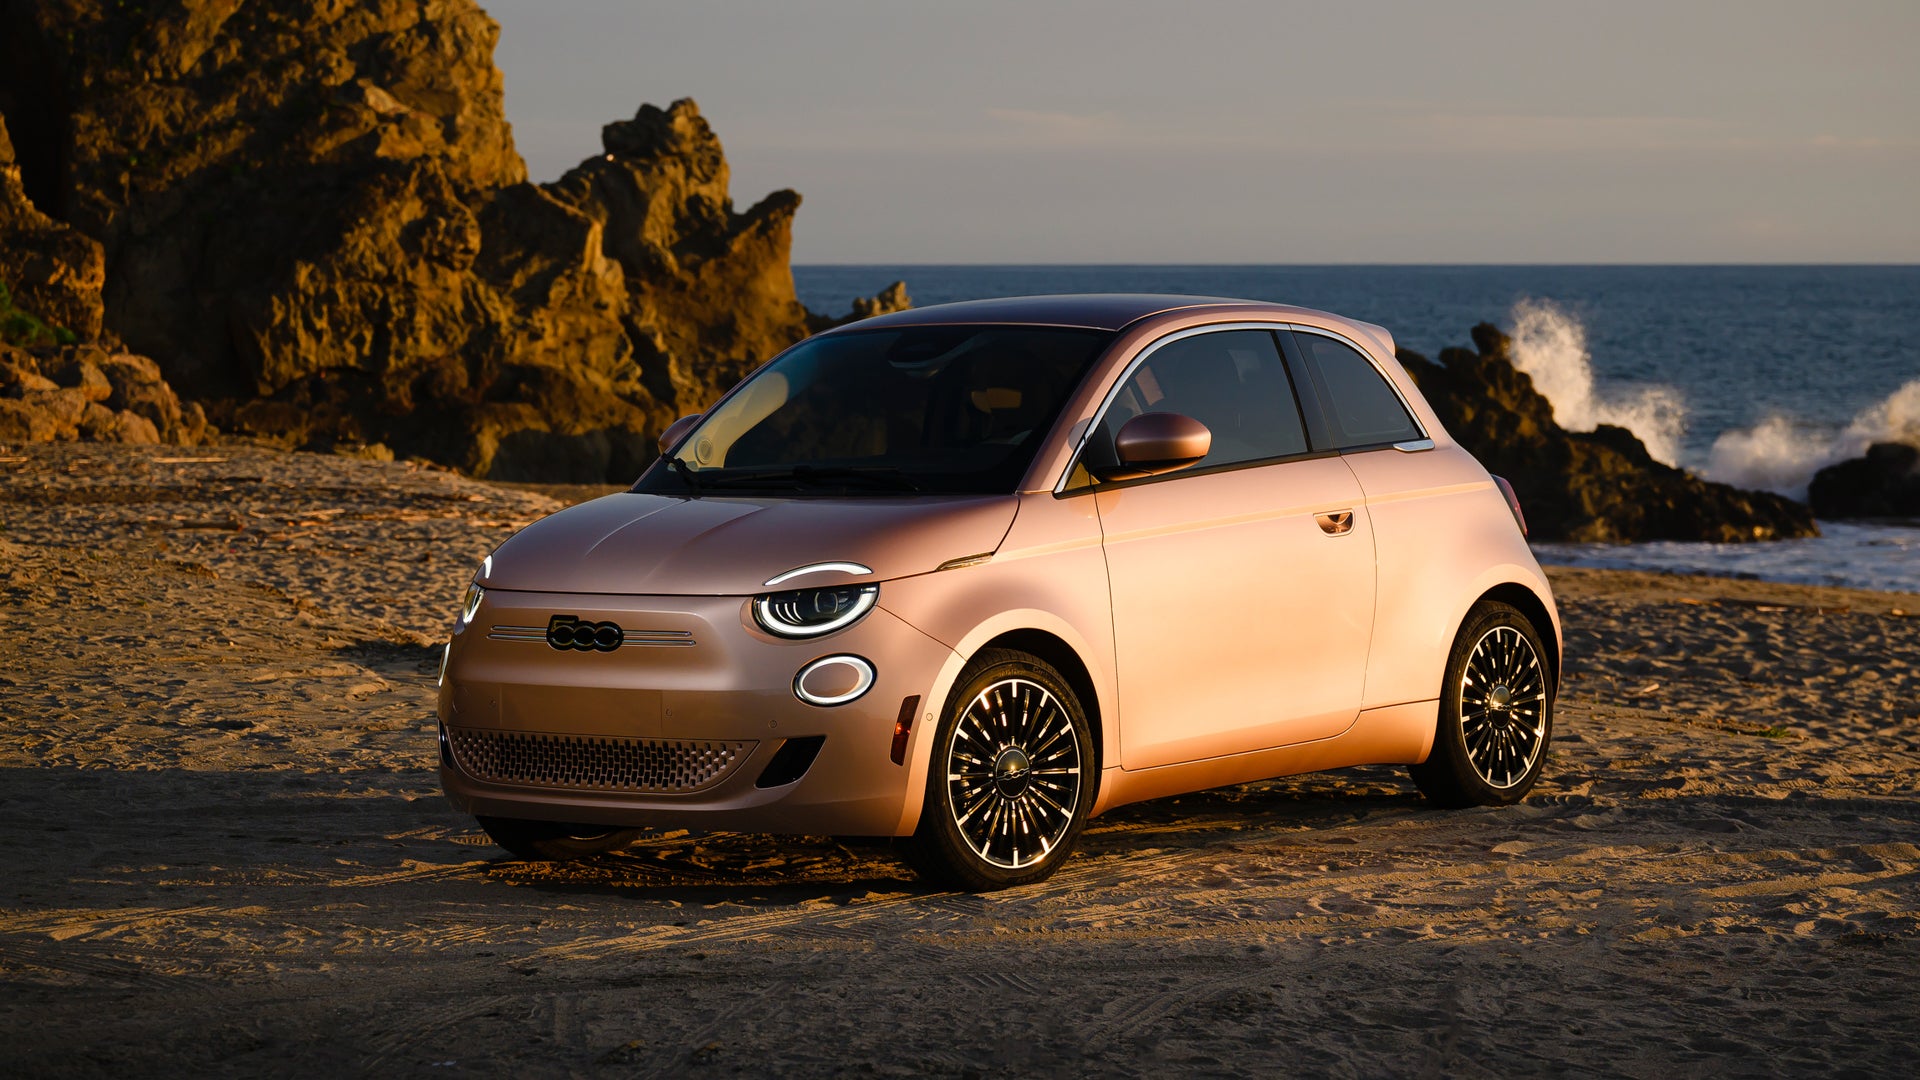 You can get a Fiat 500e special edition for under $40,000, even if it’s not very practical.